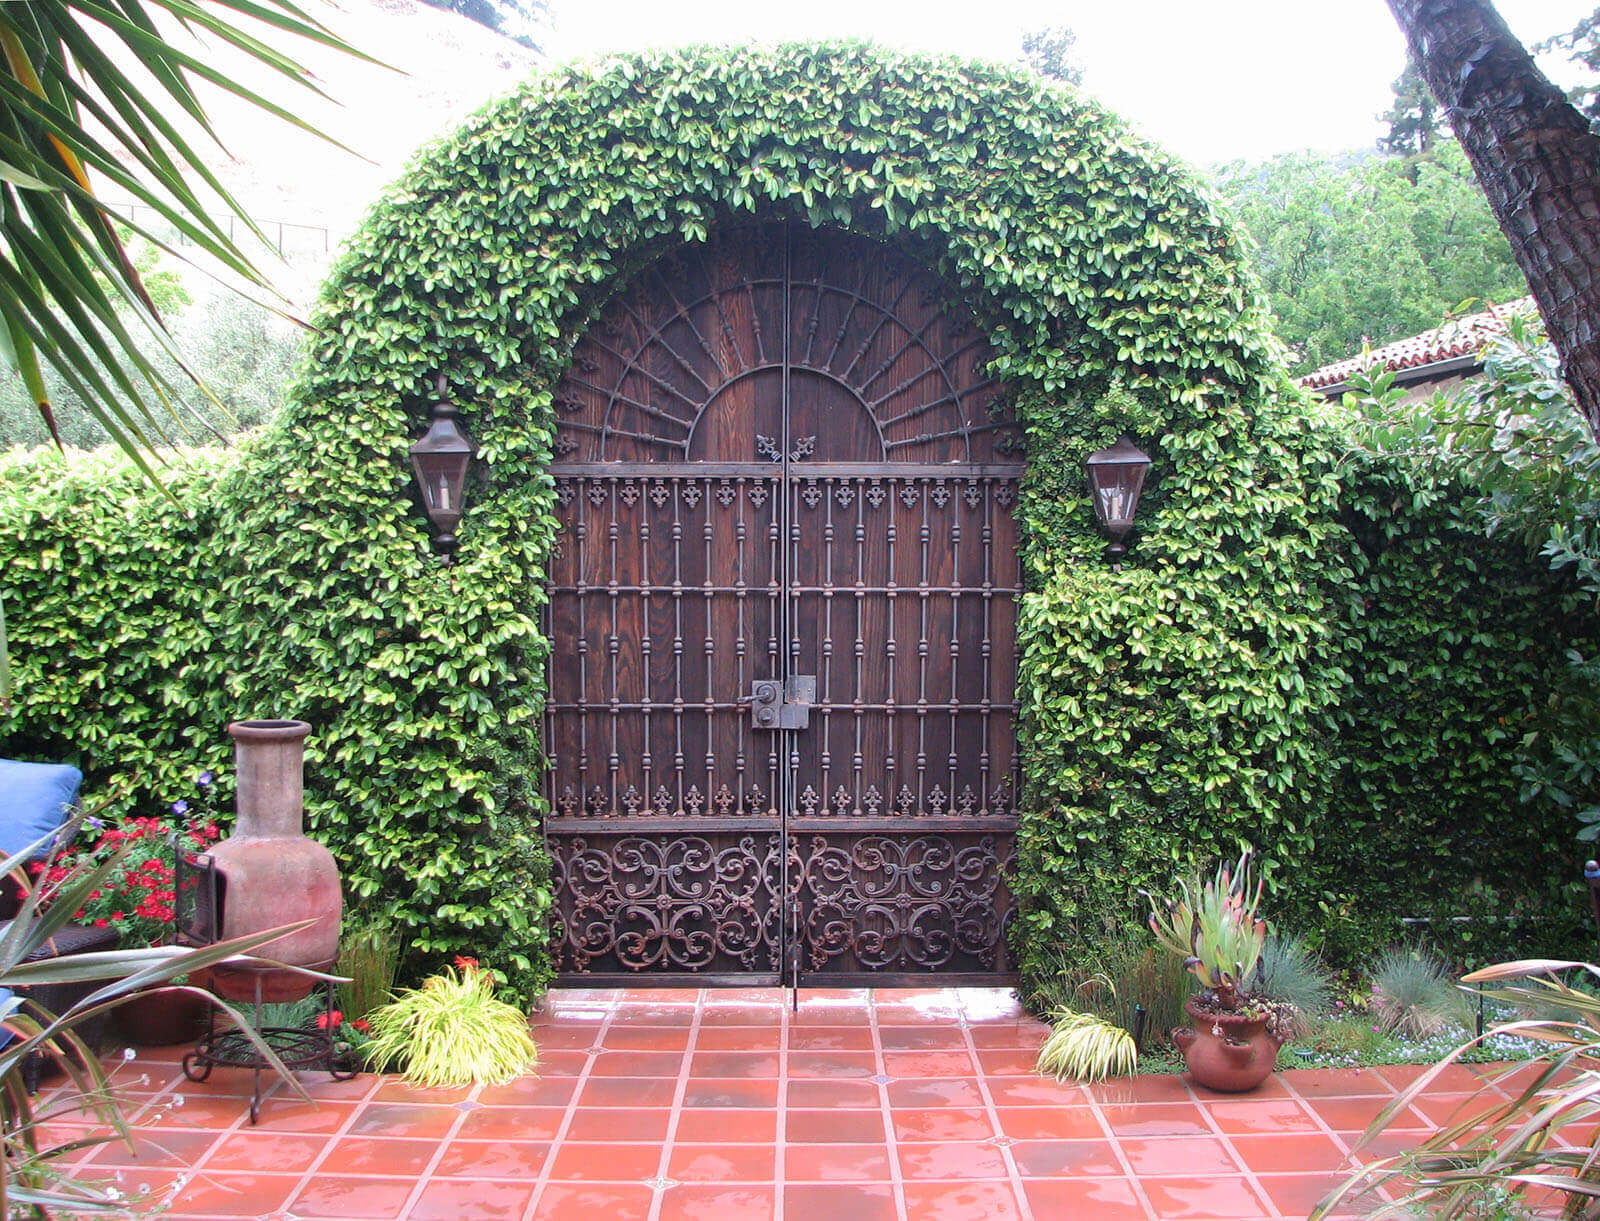 Vine-covered wall with Spanish style rustic wood and iron door